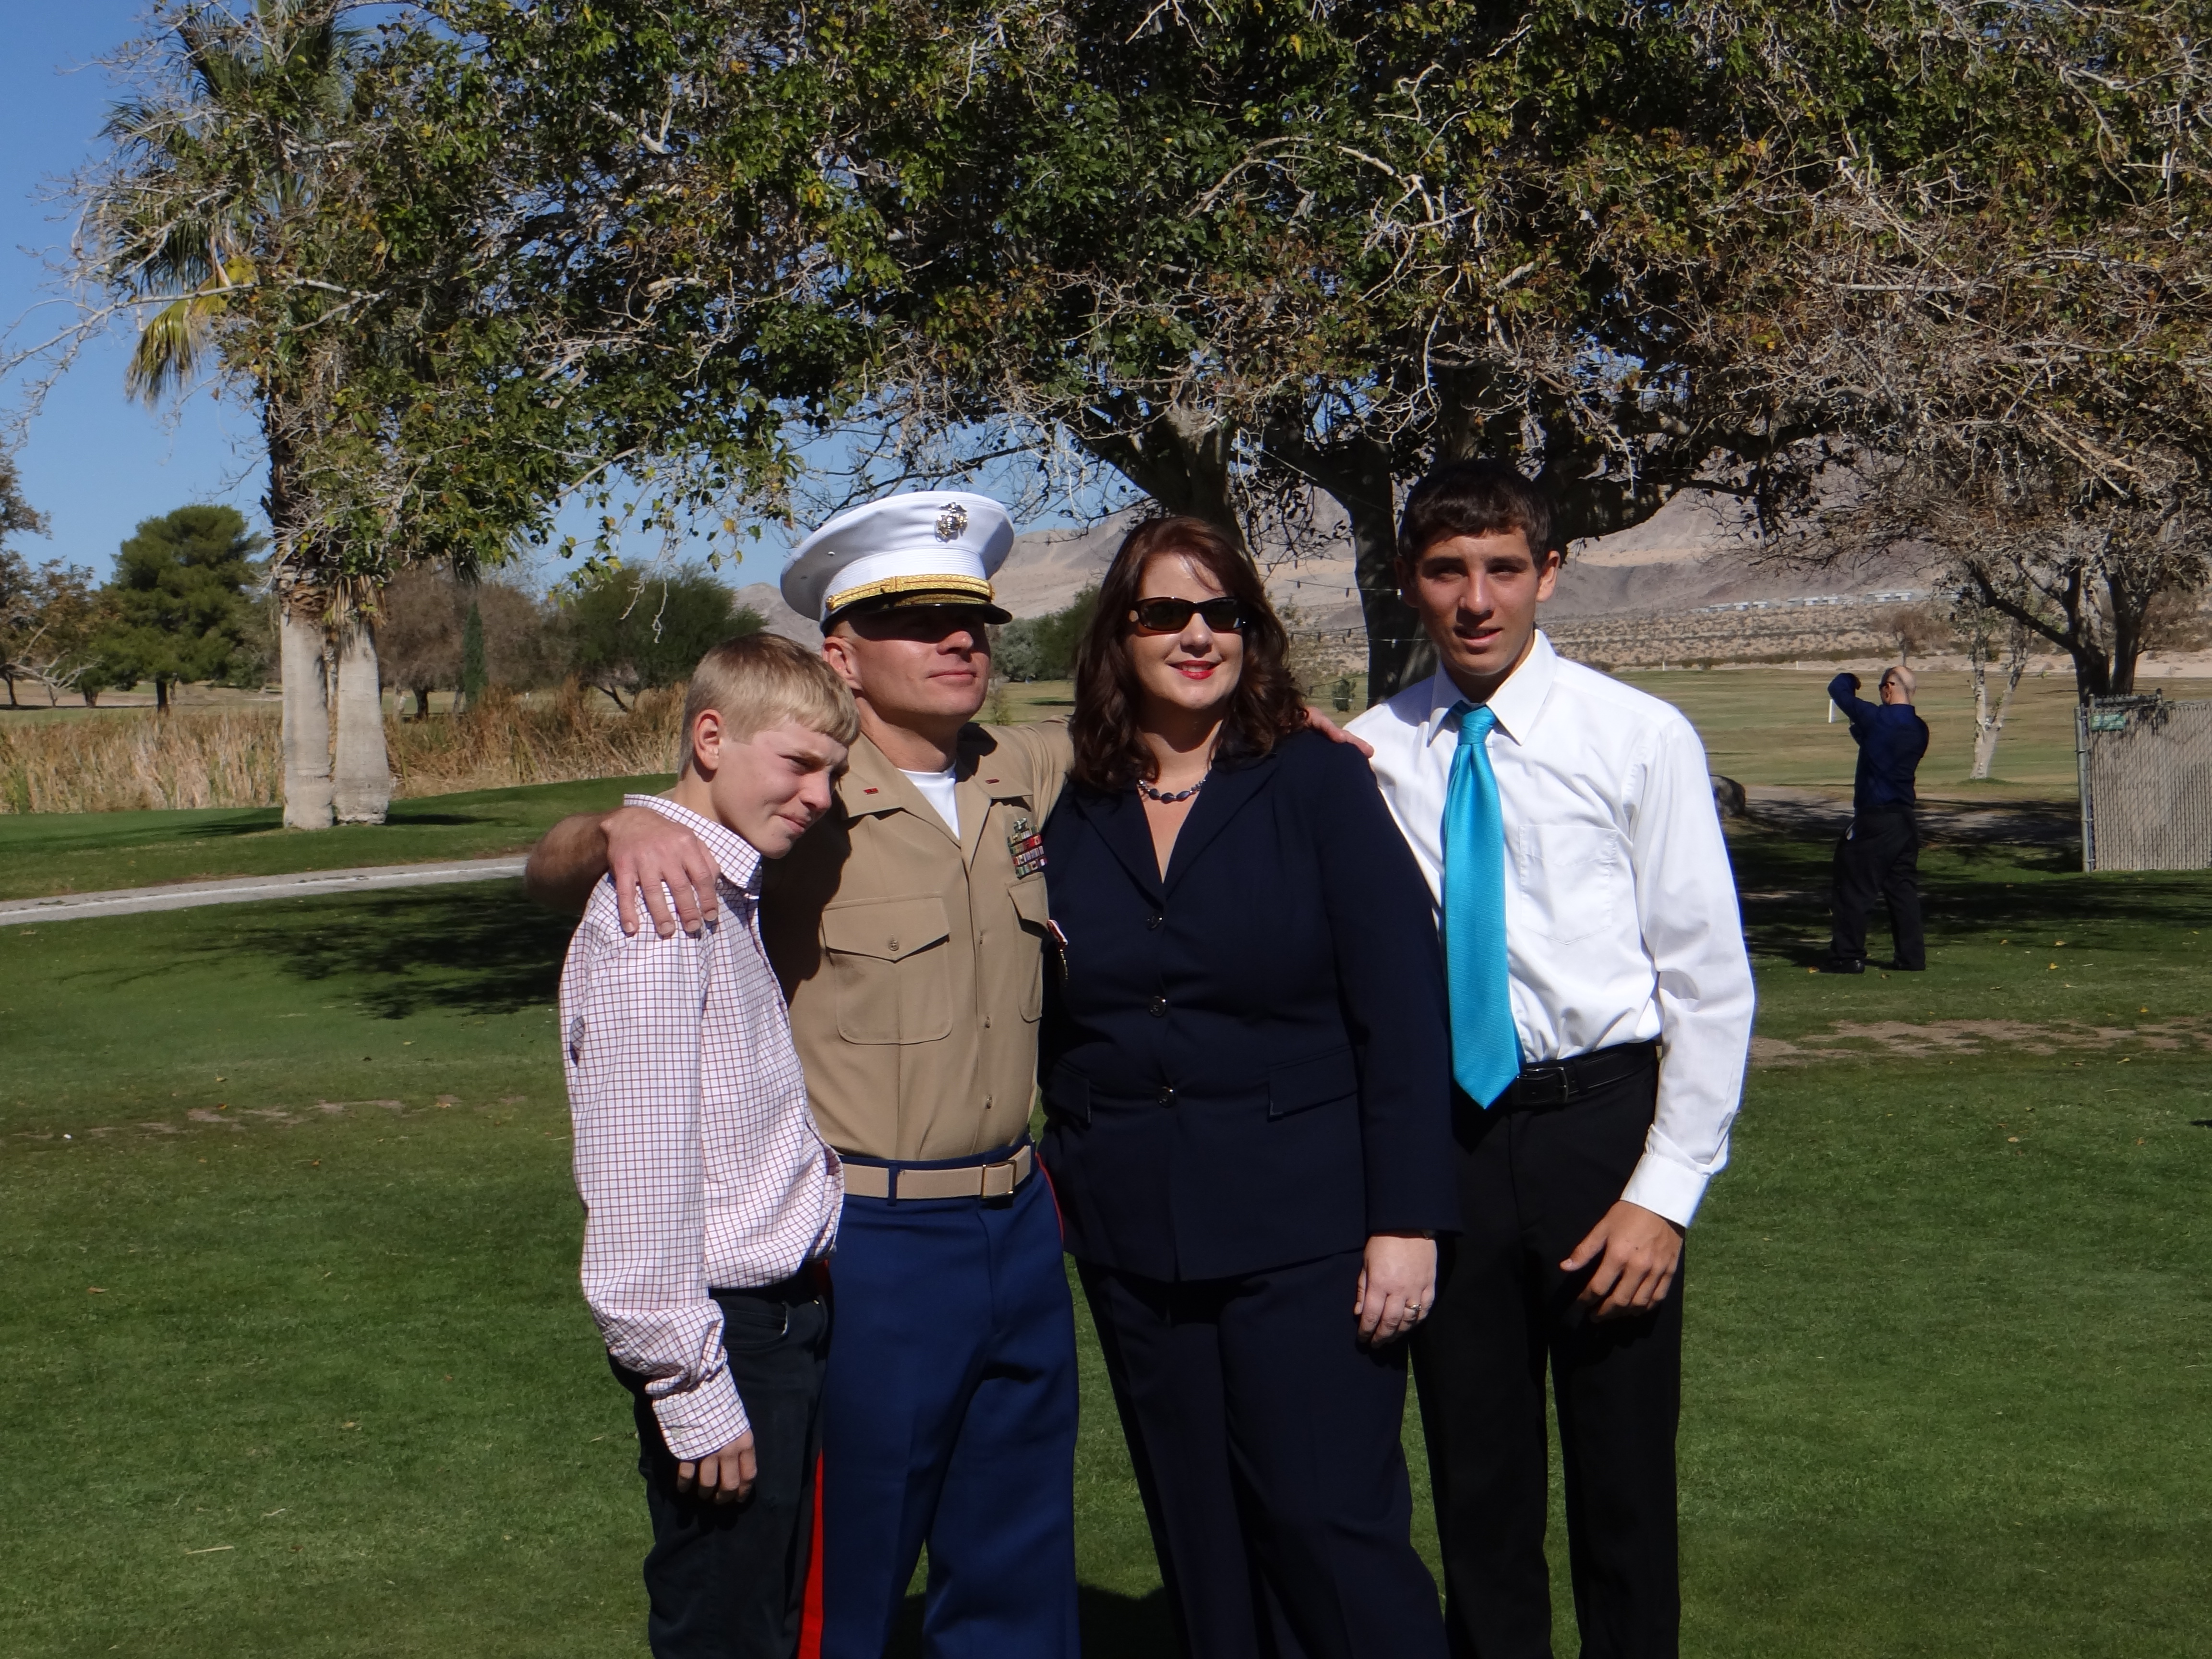 John in uniform with family.